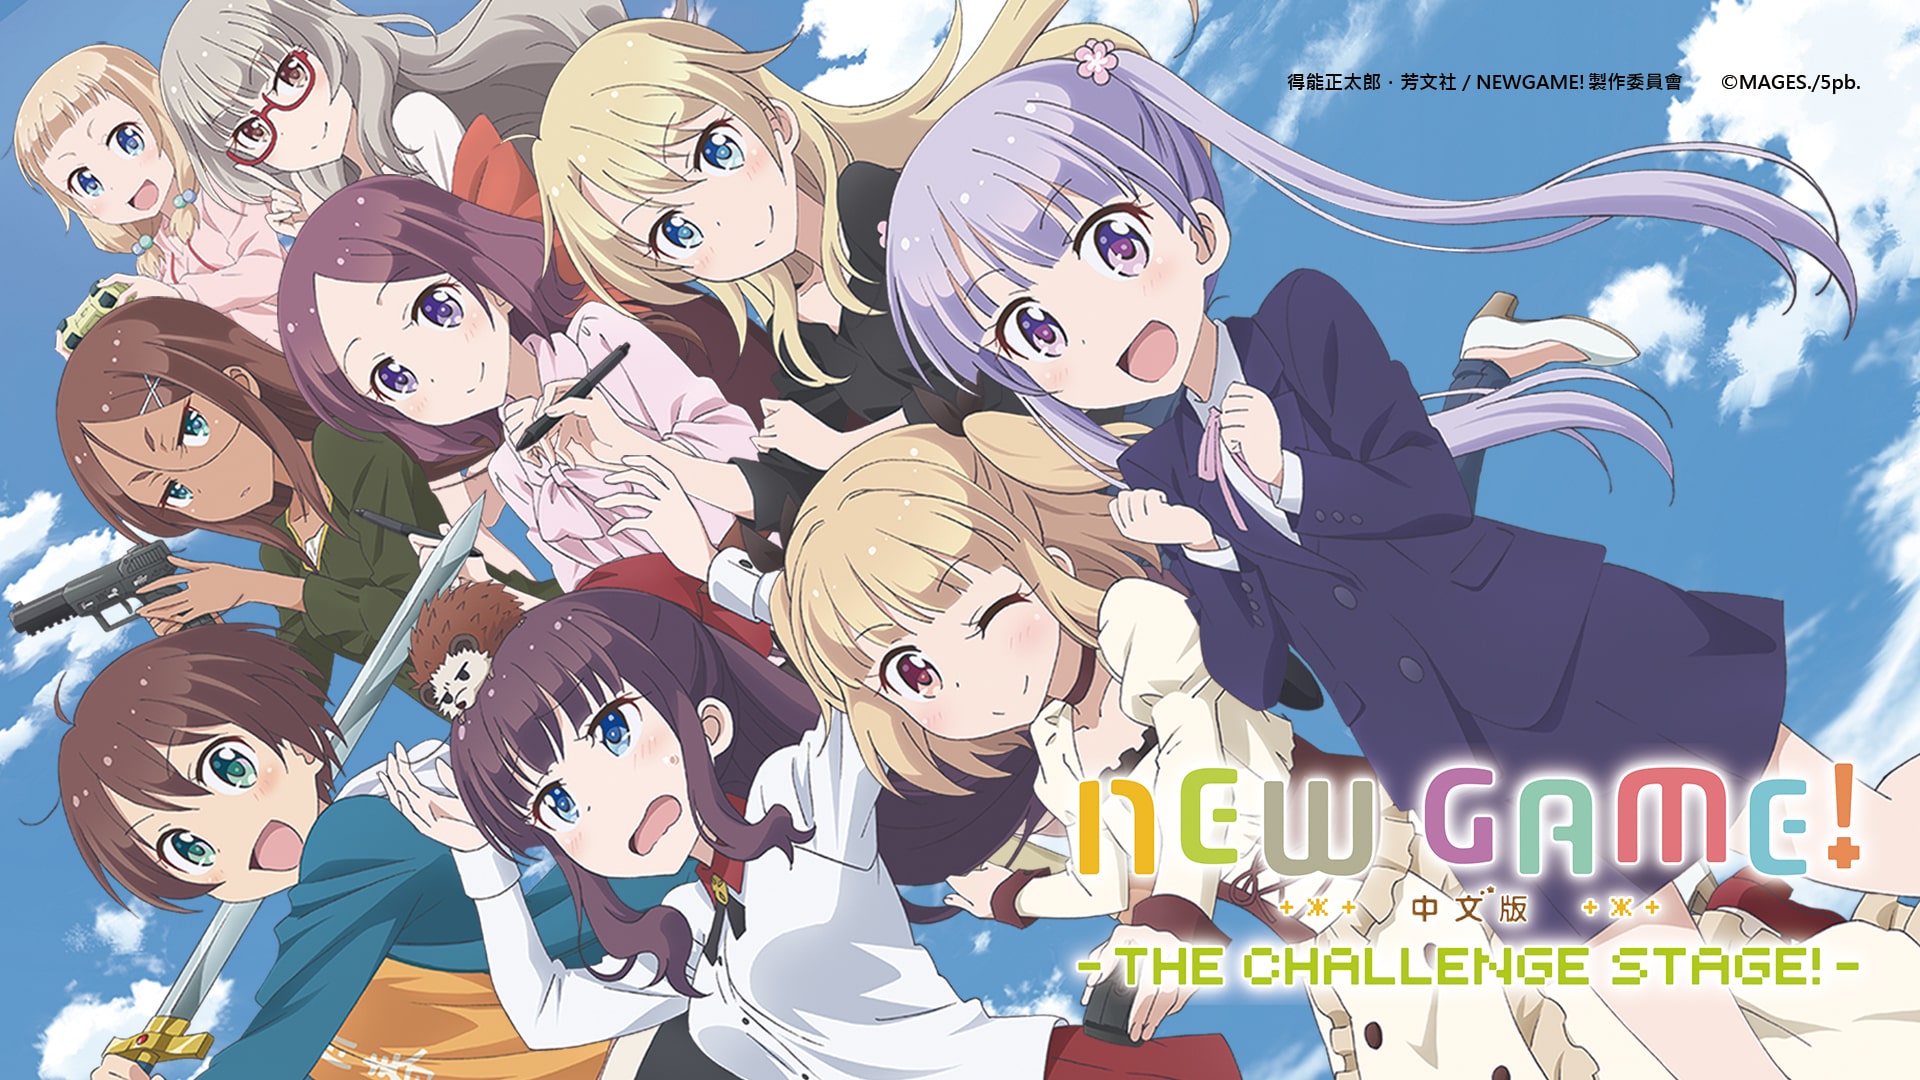 NEW GAME! -THE CHALLENGE STAGE!- (中文版)